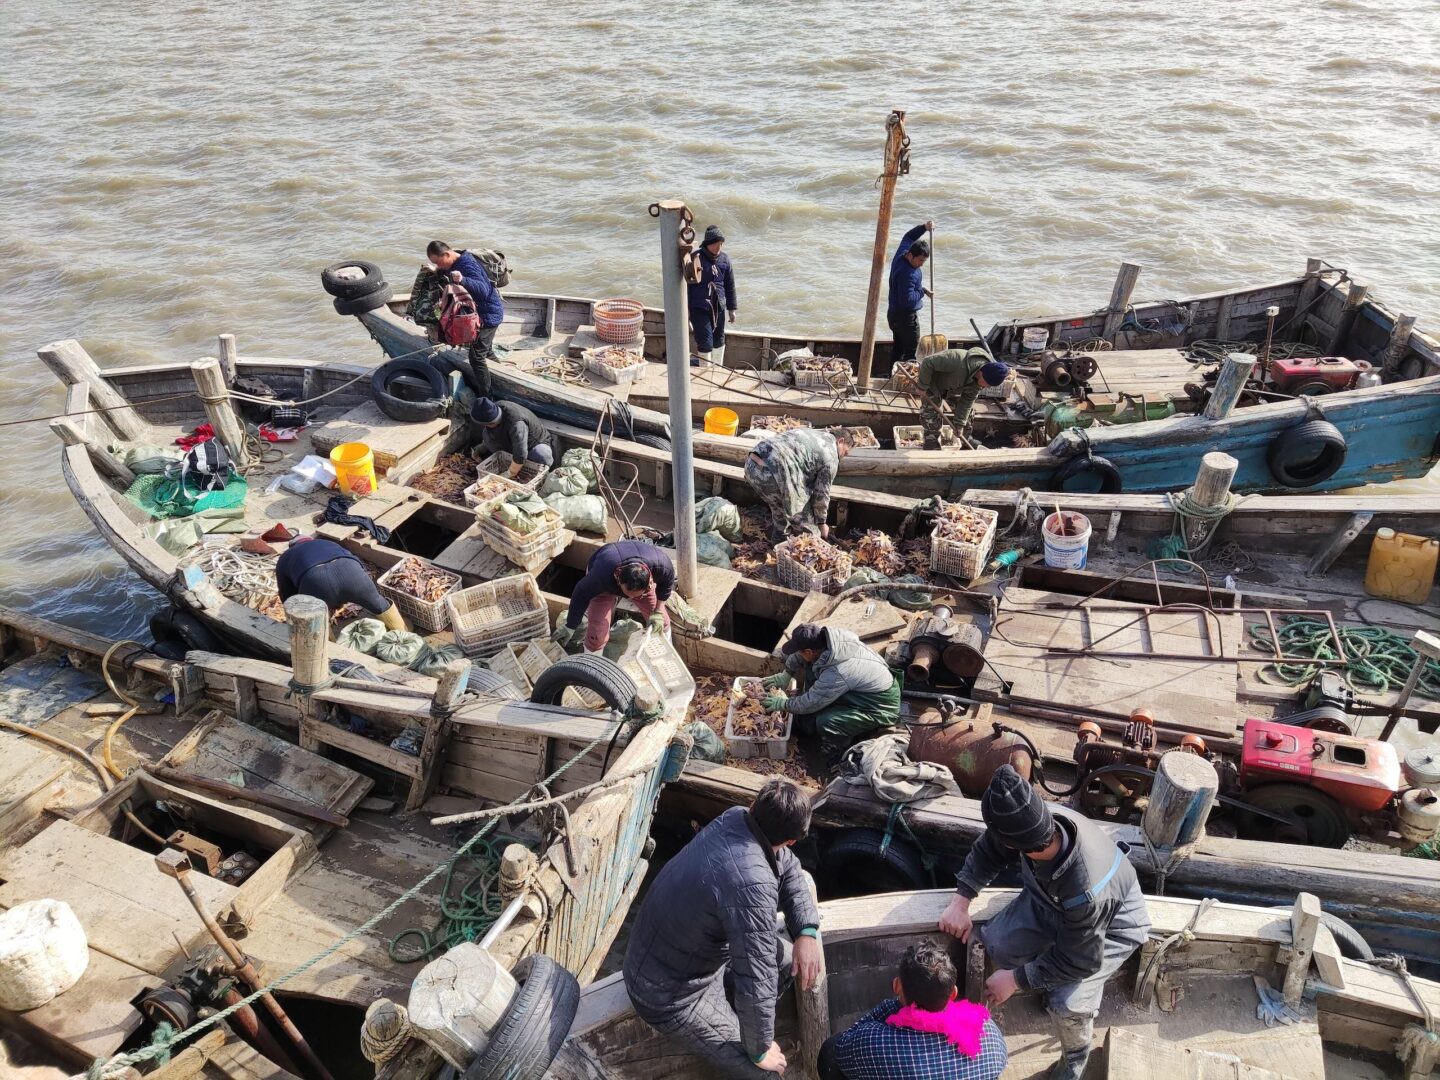 Local fishers in Jiaouzhou Bay were allowed to use banned "cage nets" to help deal with the recent seastar outbreak